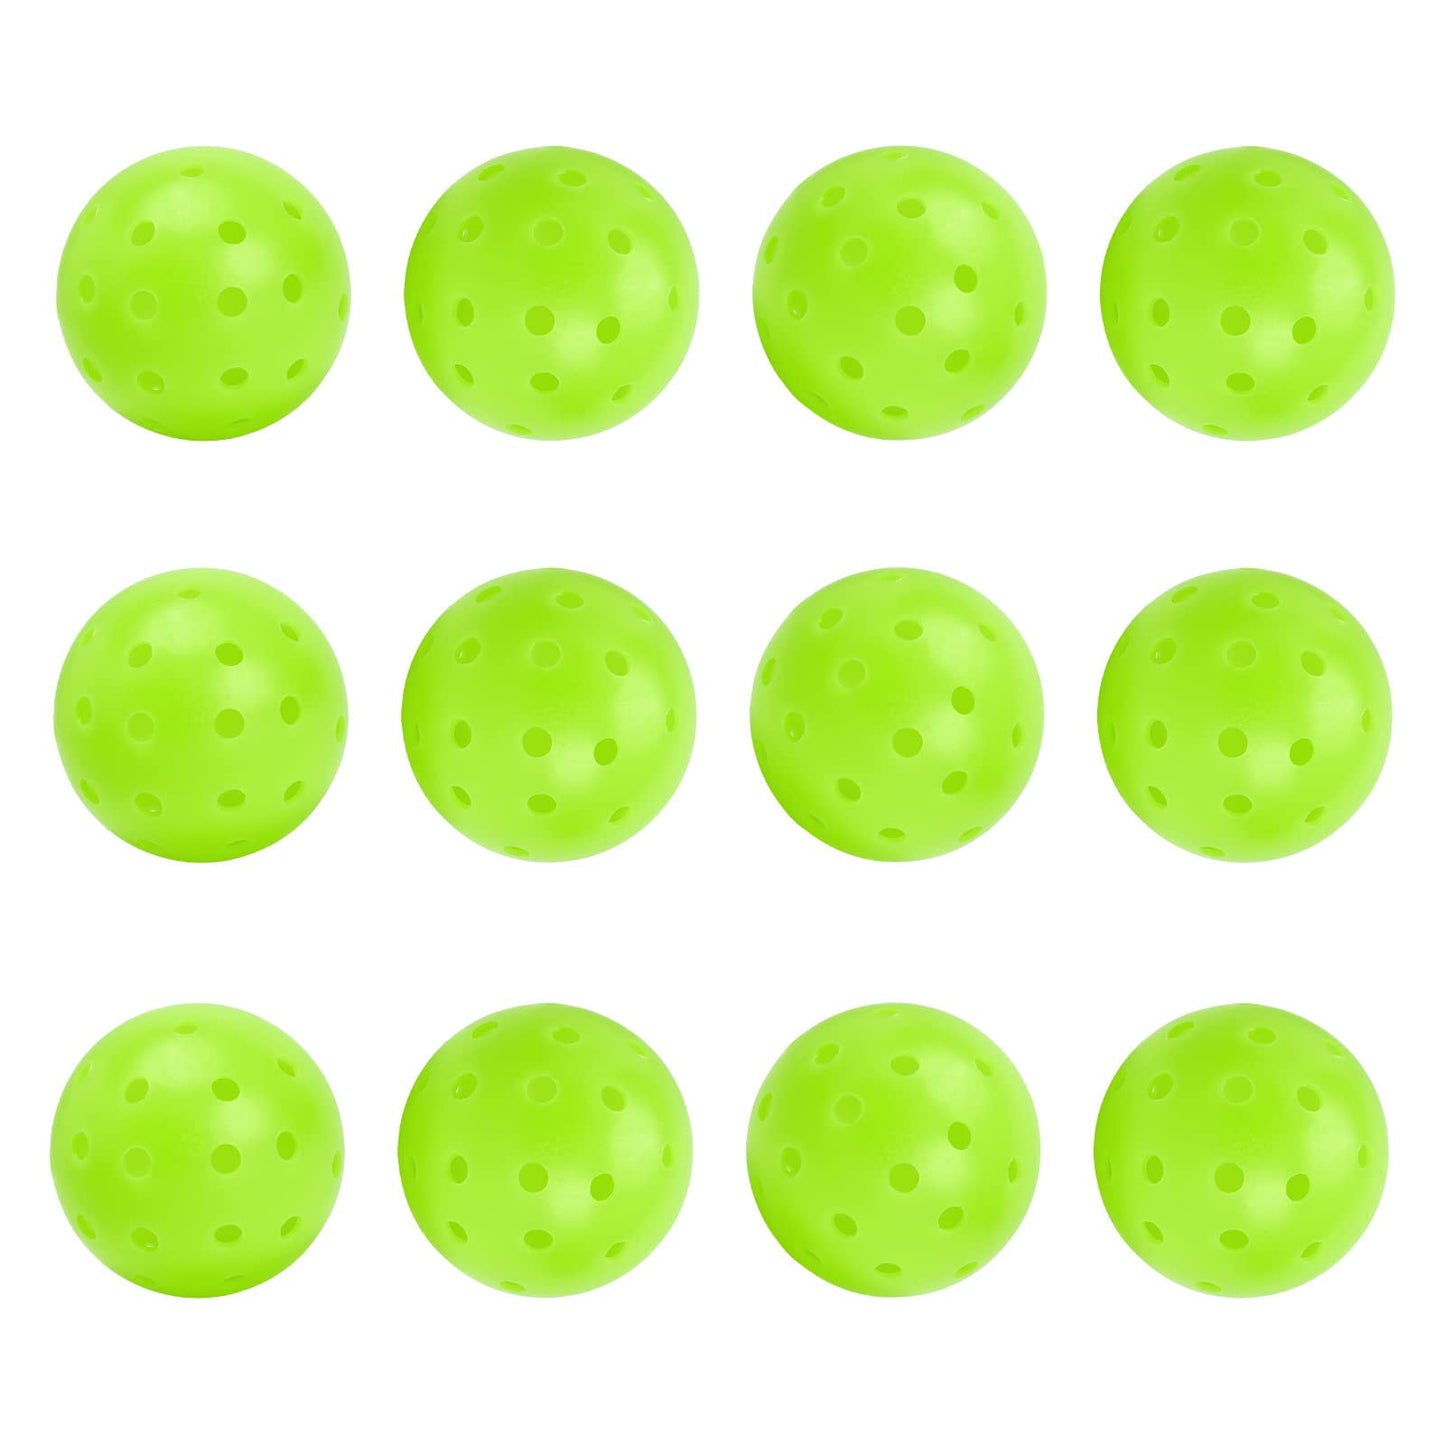 Outdoor Pickleballs (12 Pack) -Specifically Designed and Optimized for Pickleball